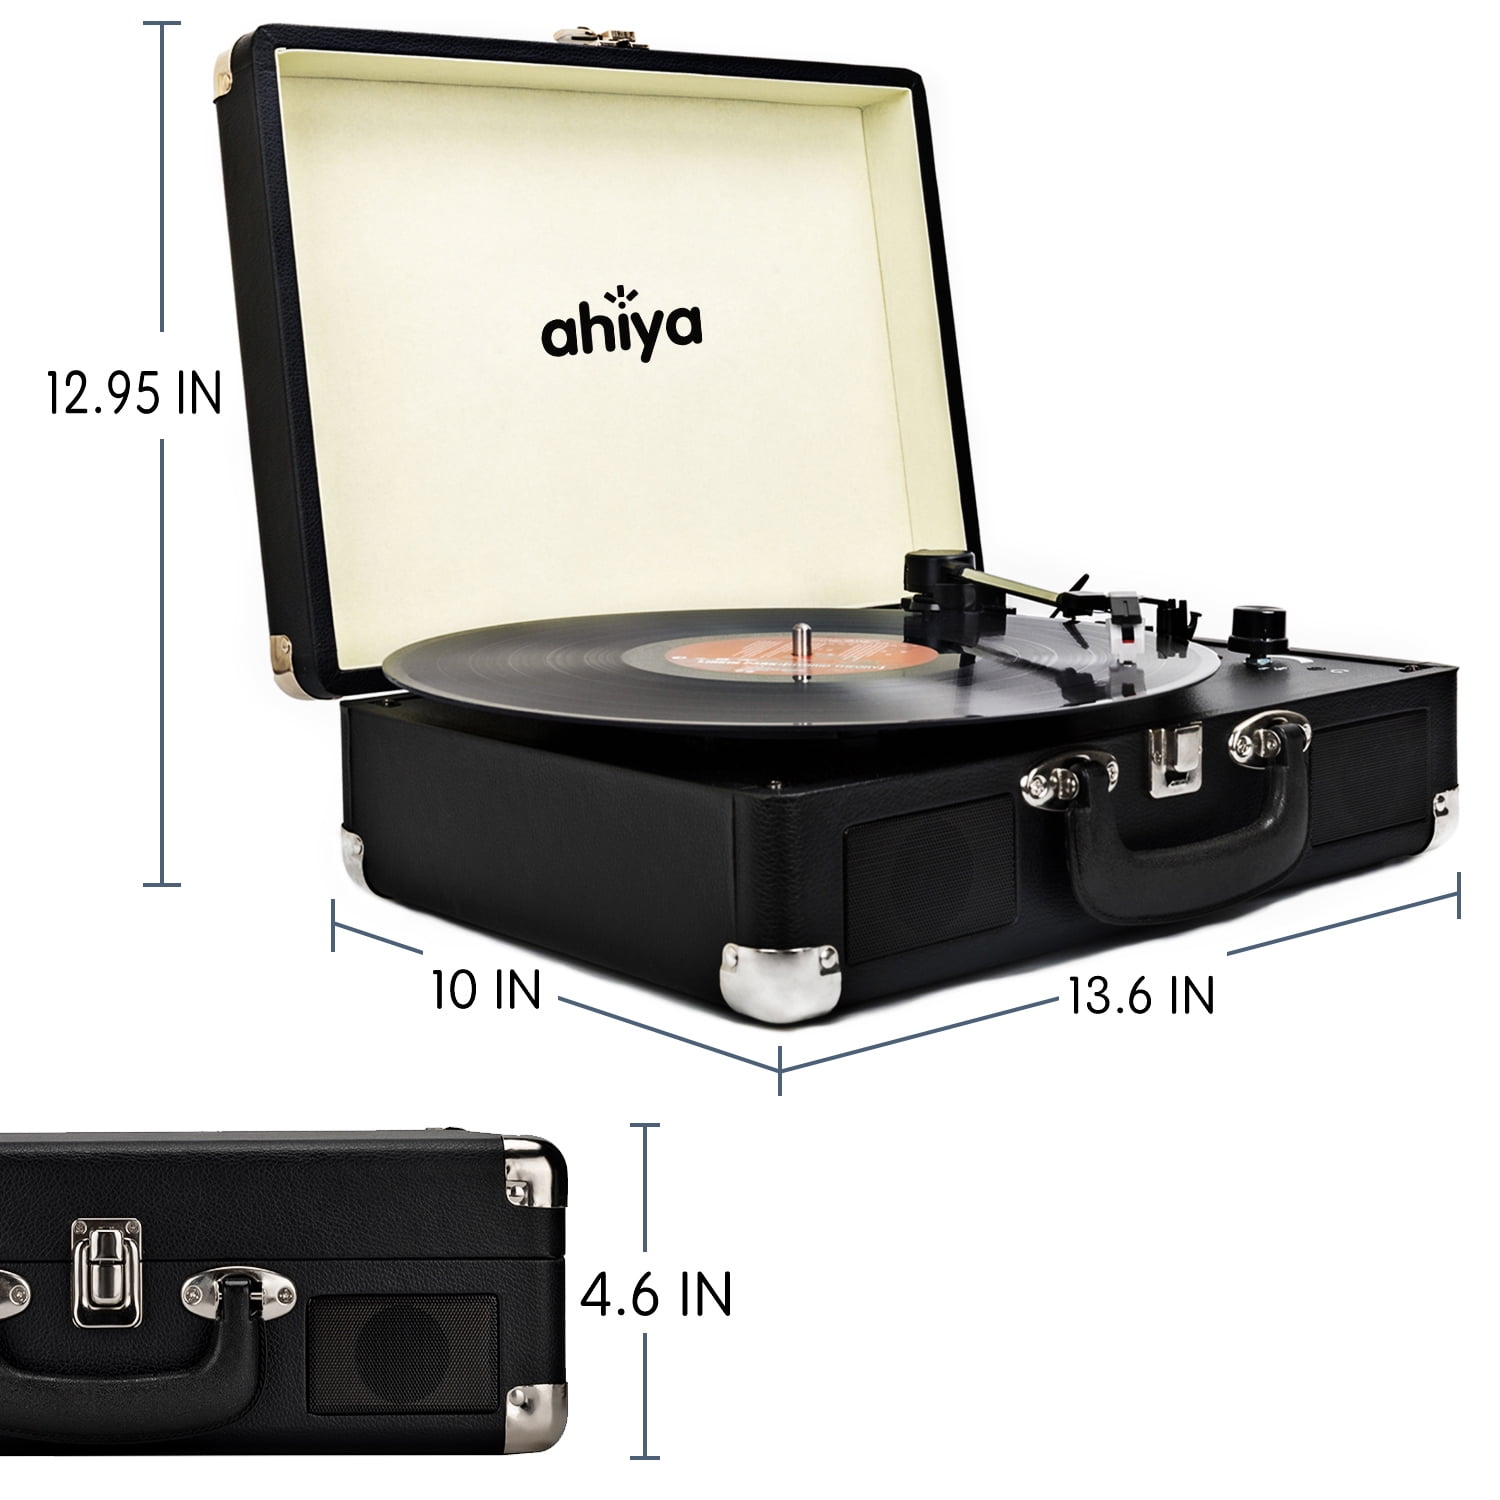 Nostalgy Retro Suitcase 3 speed Record Player by Auna with Instructions